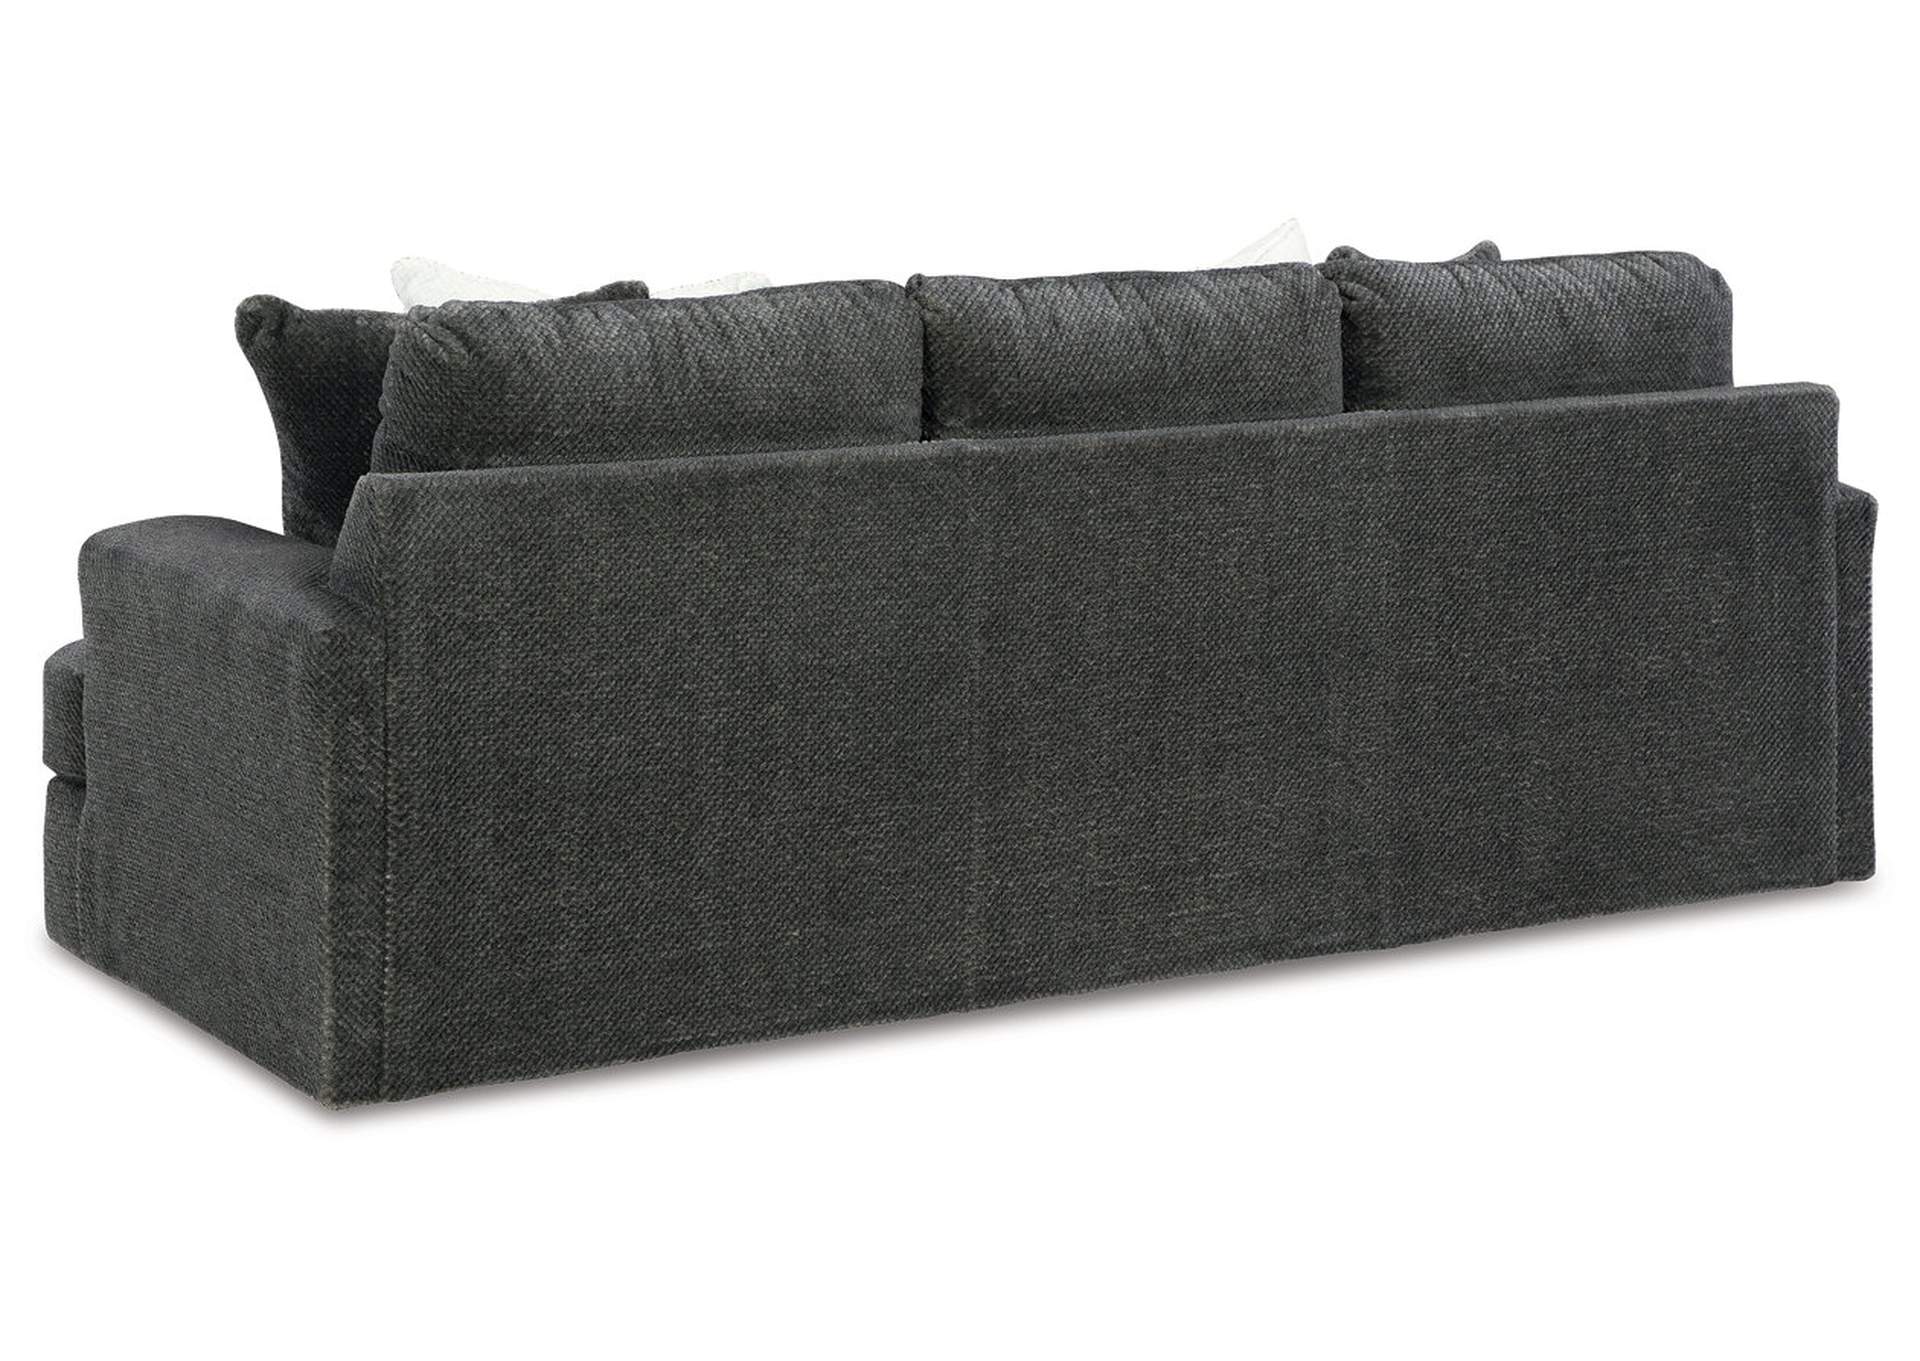 Karinne Sofa and Loveseat,Signature Design By Ashley